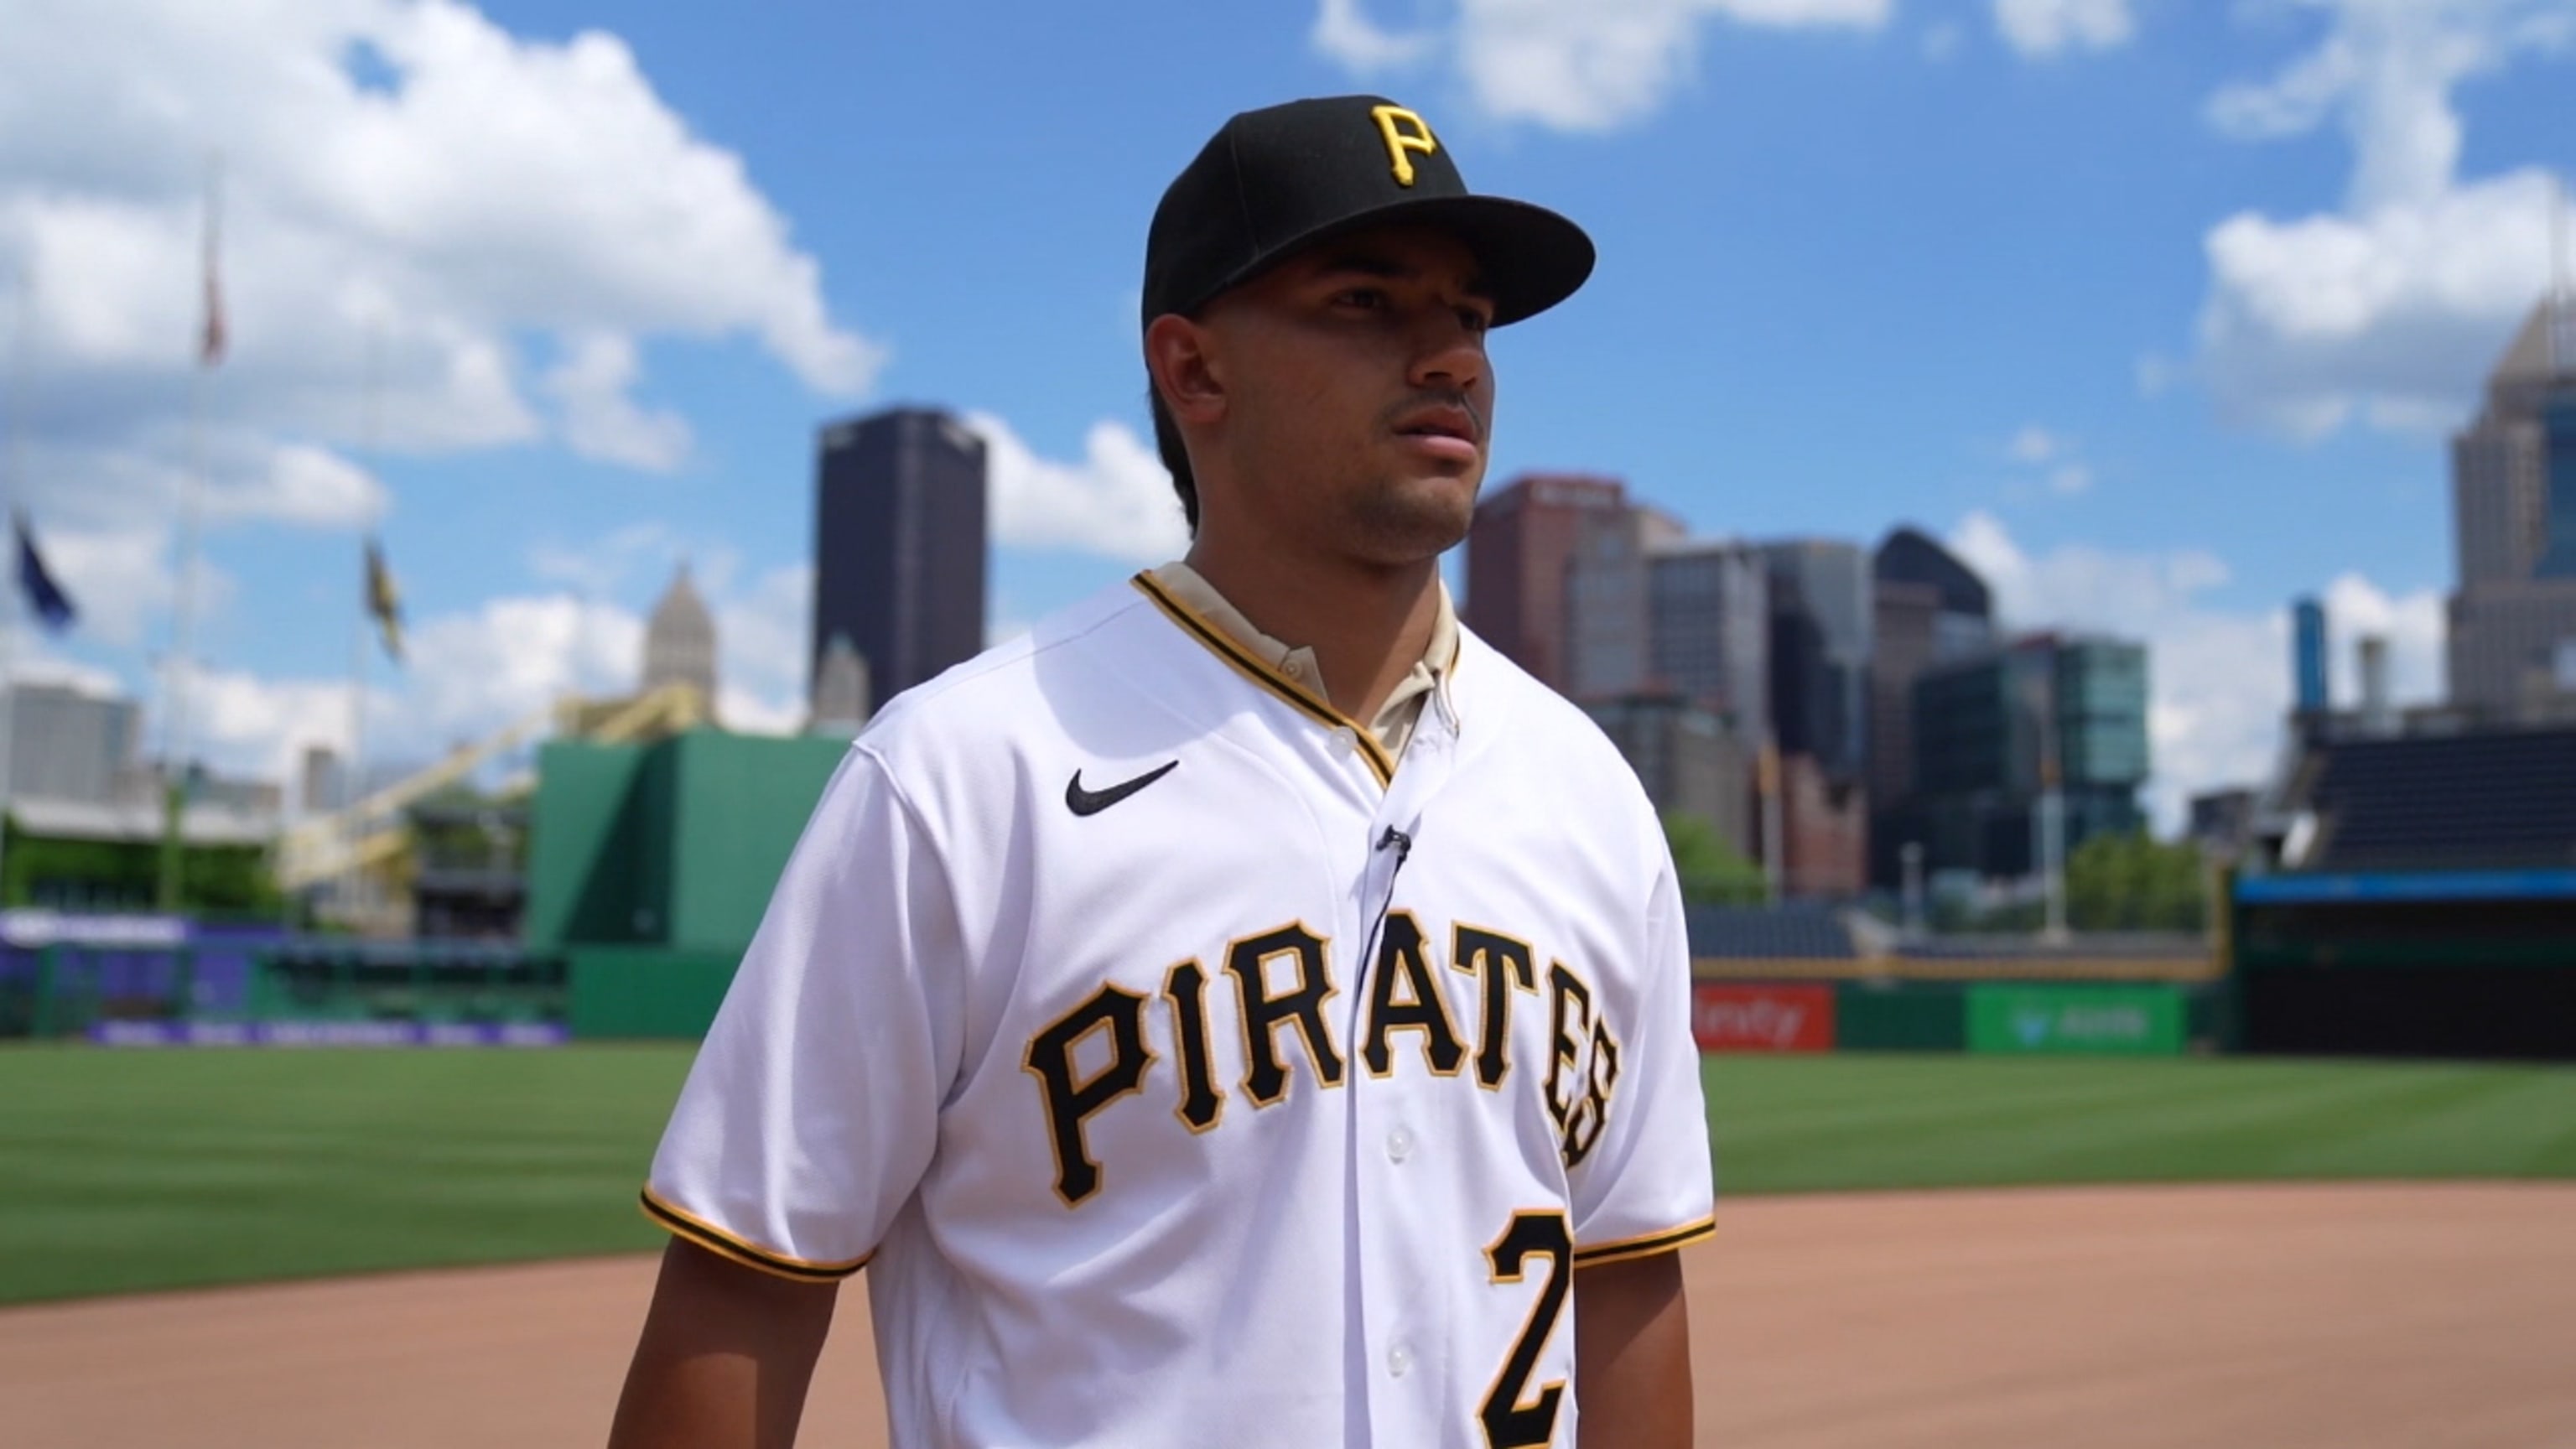 Pirates bring up infield prospect Nick Gonzales, who was drafted